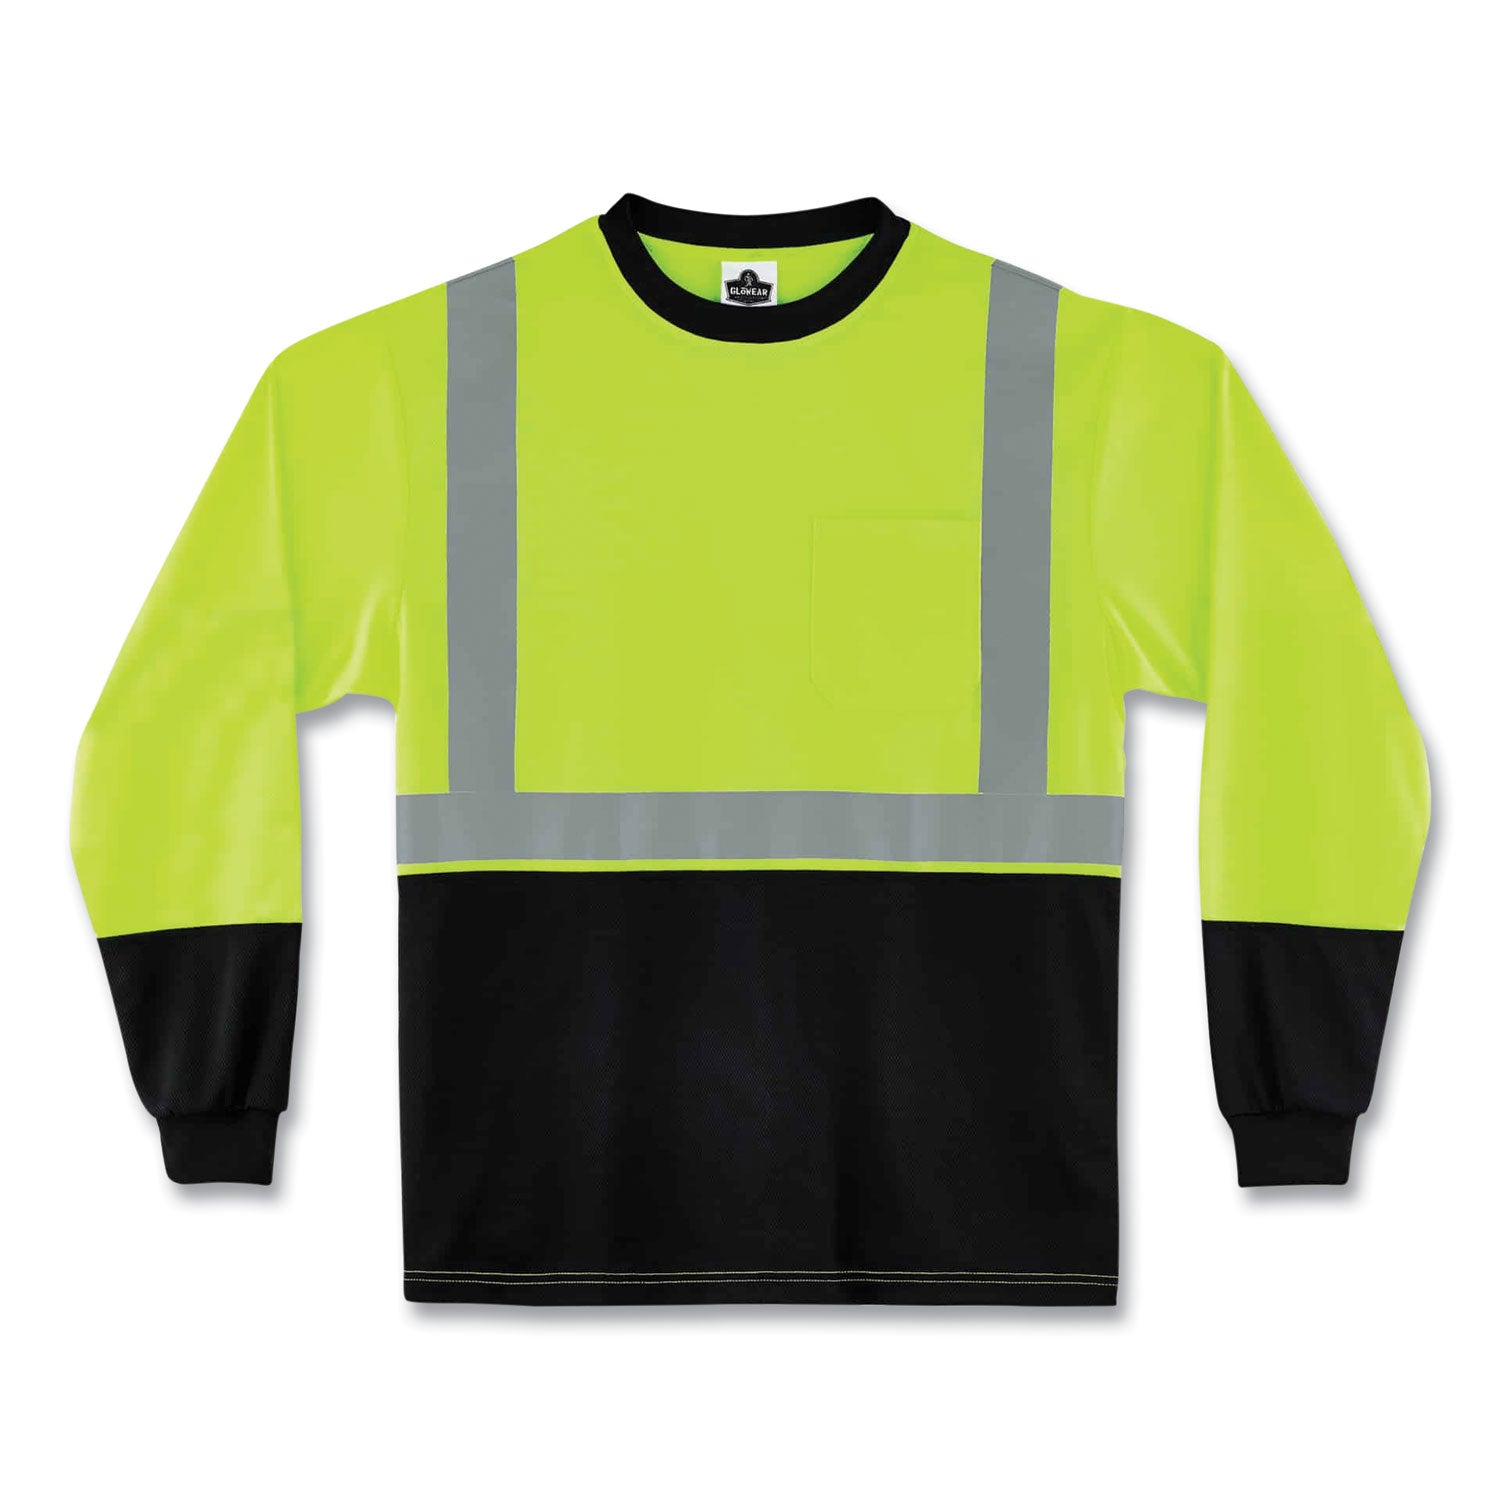 glowear-8291bk-type-r-class-2-black-front-long-sleeve-t-shirt-polyester-medium-lime-ships-in-1-3-business-days_ego22703 - 1